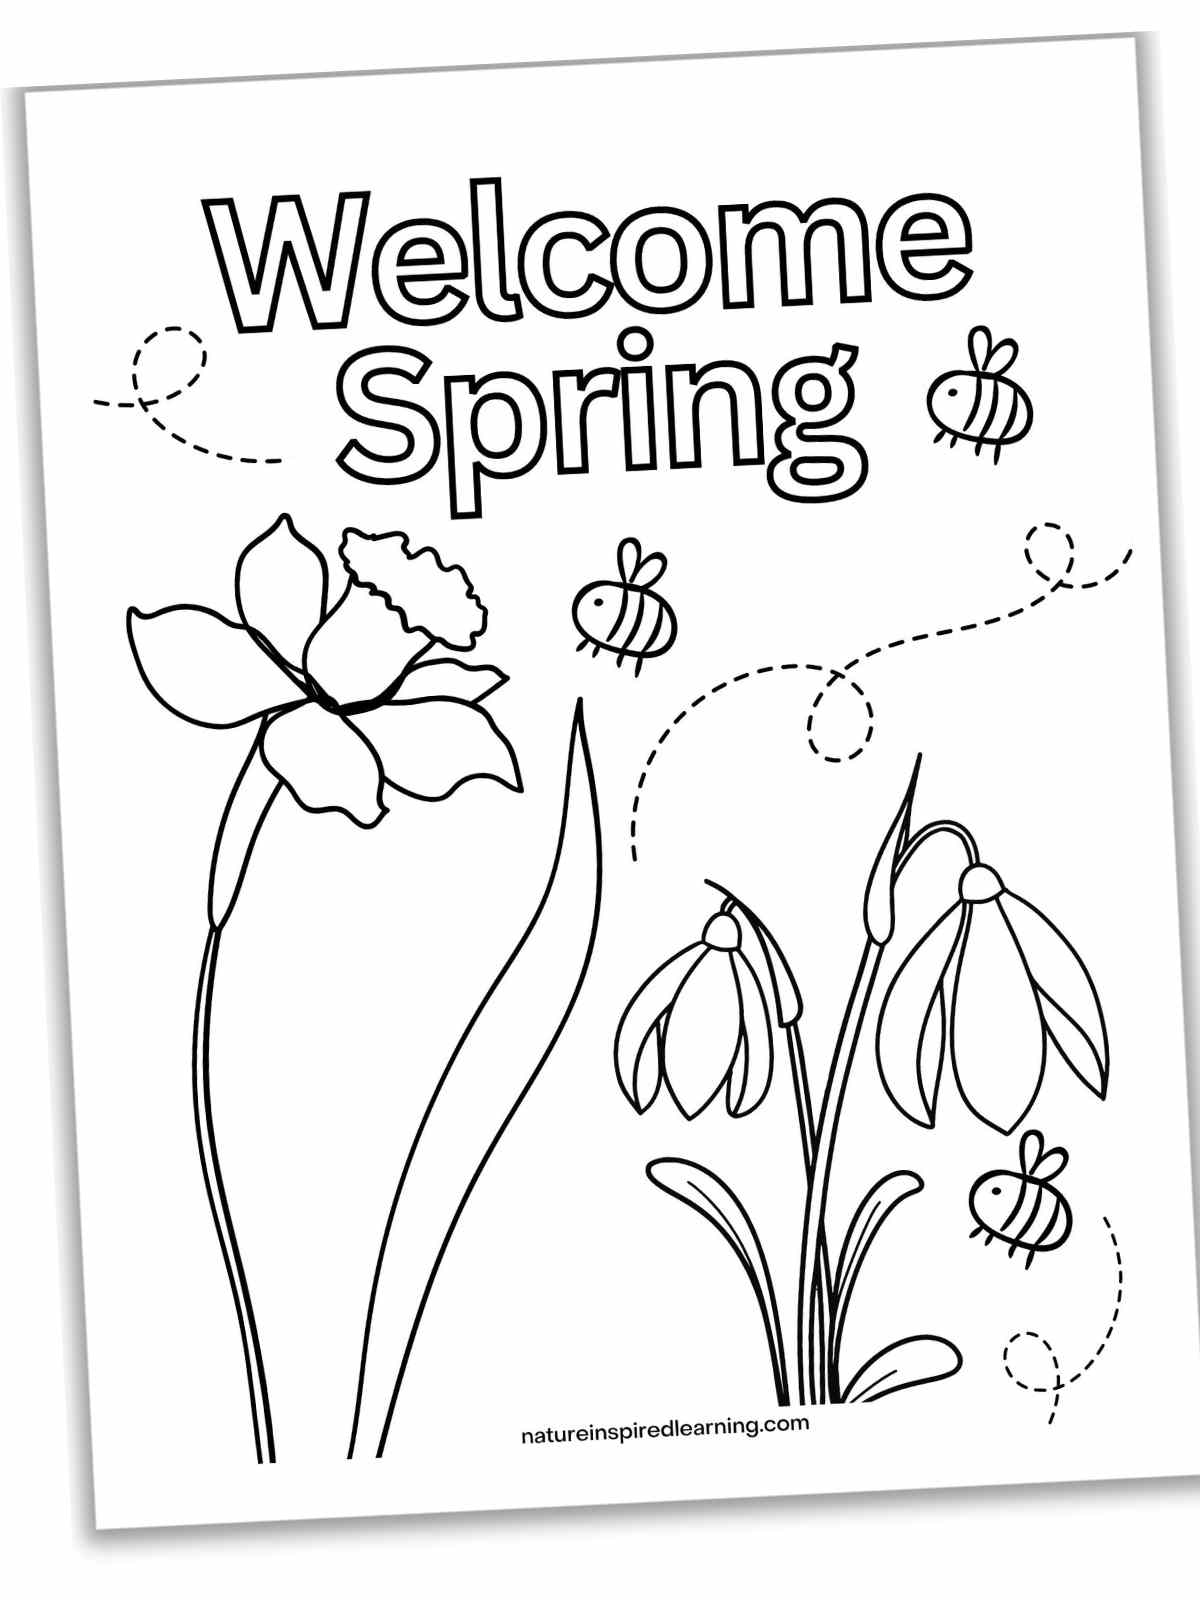 black and white printable with Welcome Spring across the top in outline form, three bumble bees in between a daffodil and spring flowers with lopped dashed lines.